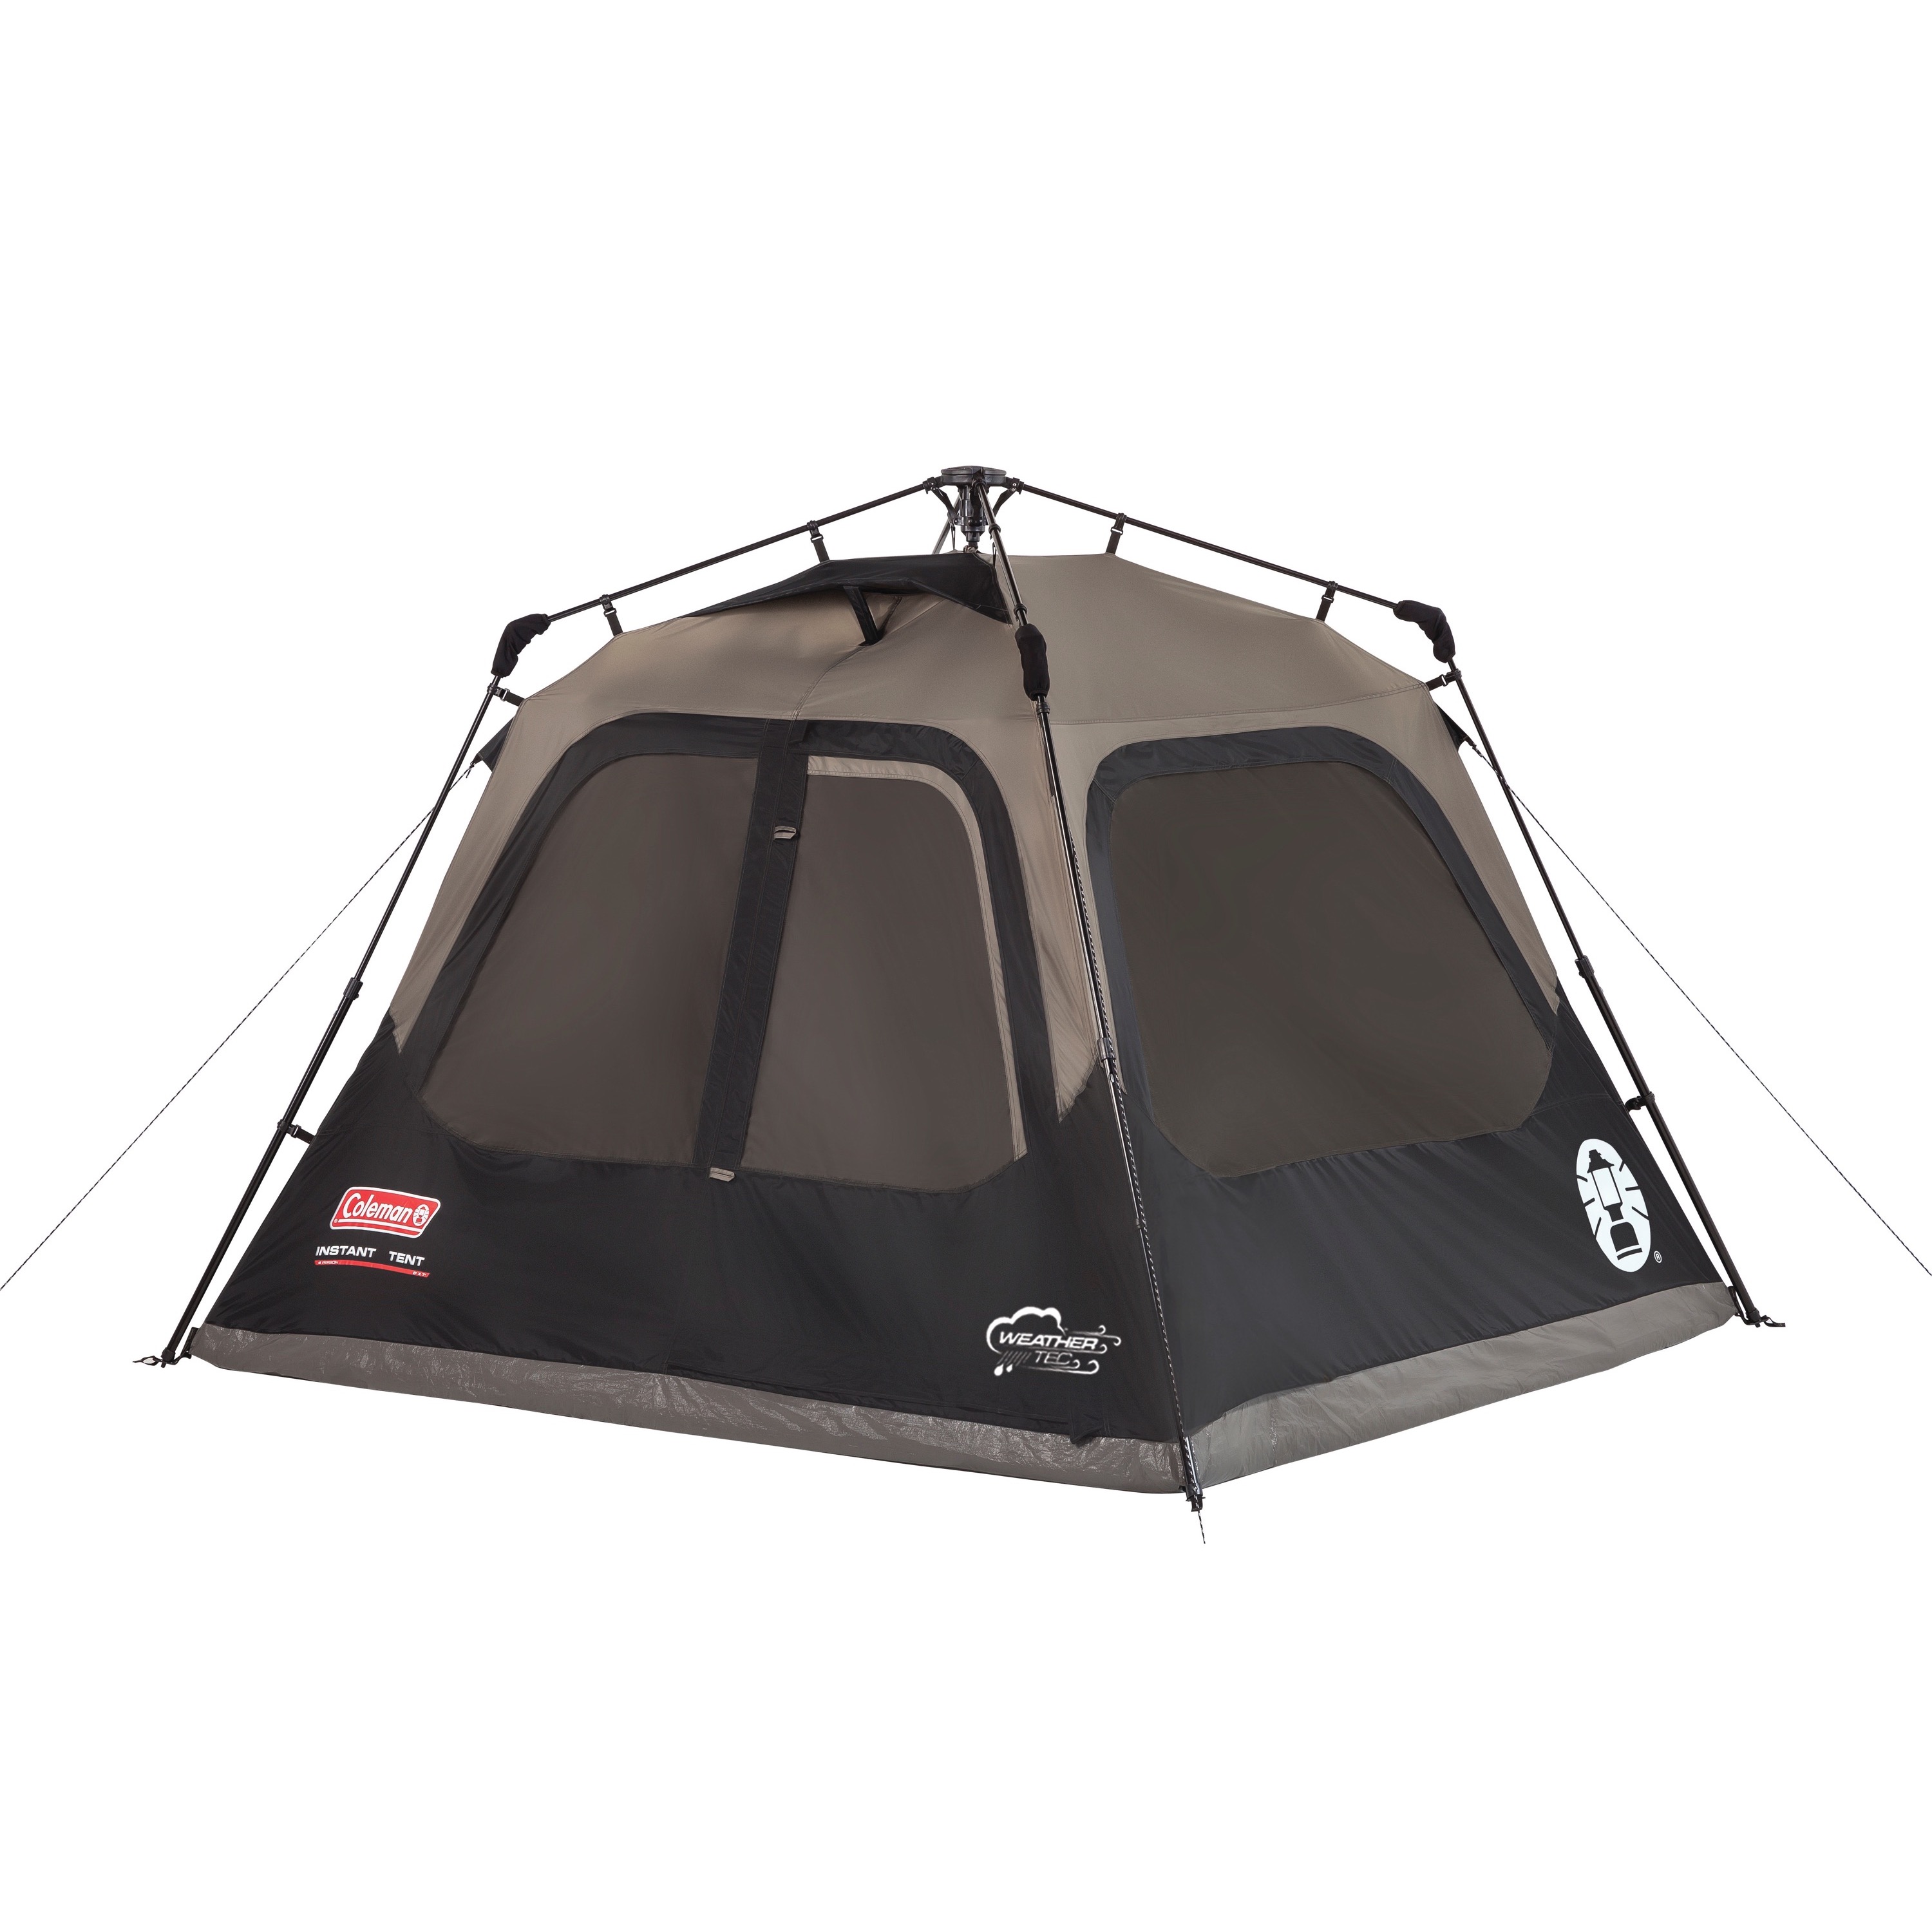 Coleman 4-Person Cabin Camping Tent with Instant Setup, 1 Room, Gray - image 1 of 7